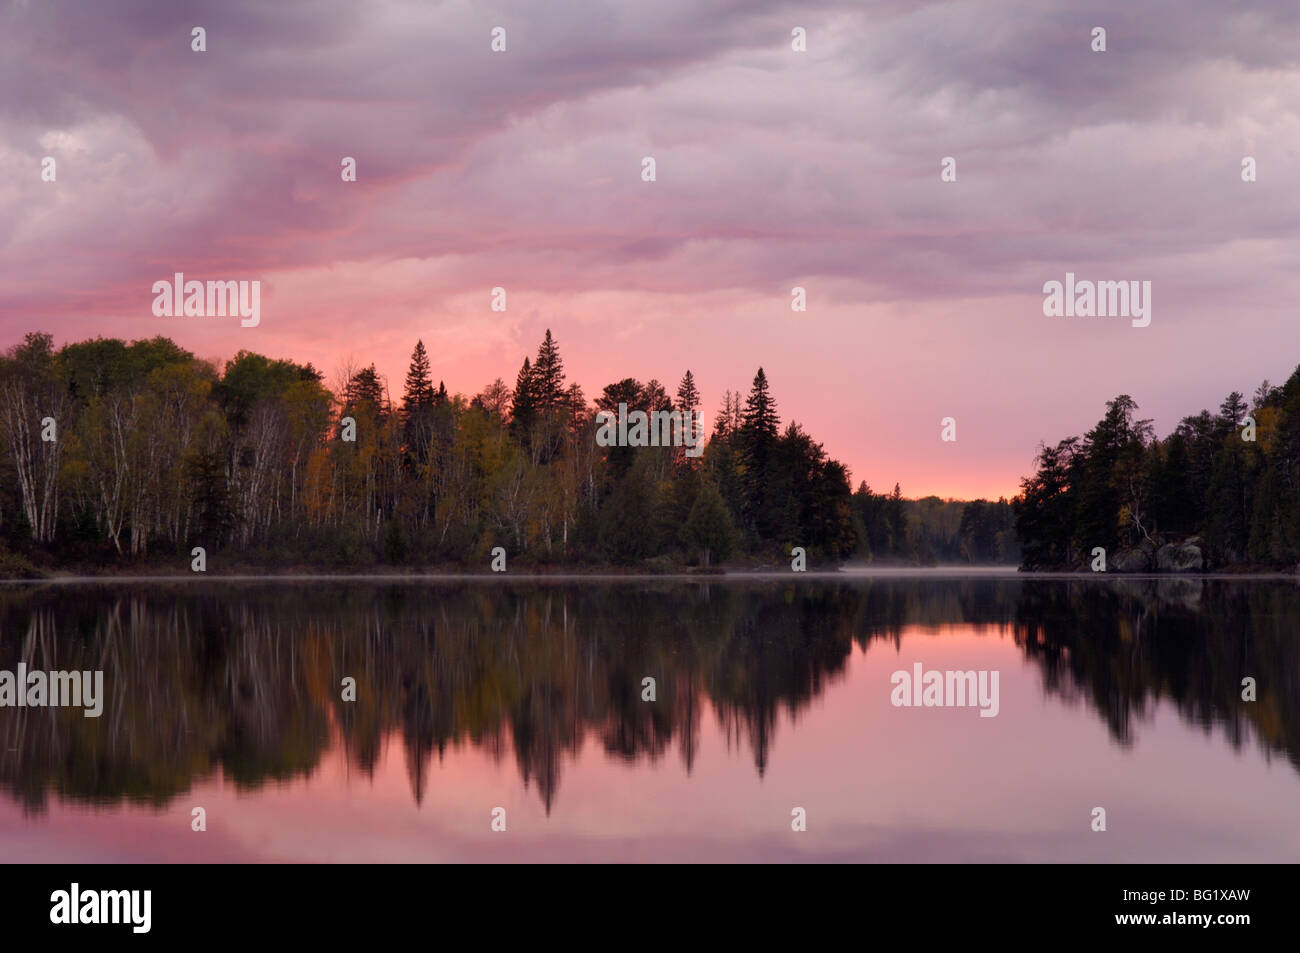 Sunset over Malberg Lake, Boundary Waters Canoe Area Wilderness, Superior National Forest, Minnesota, United States of America Stock Photo